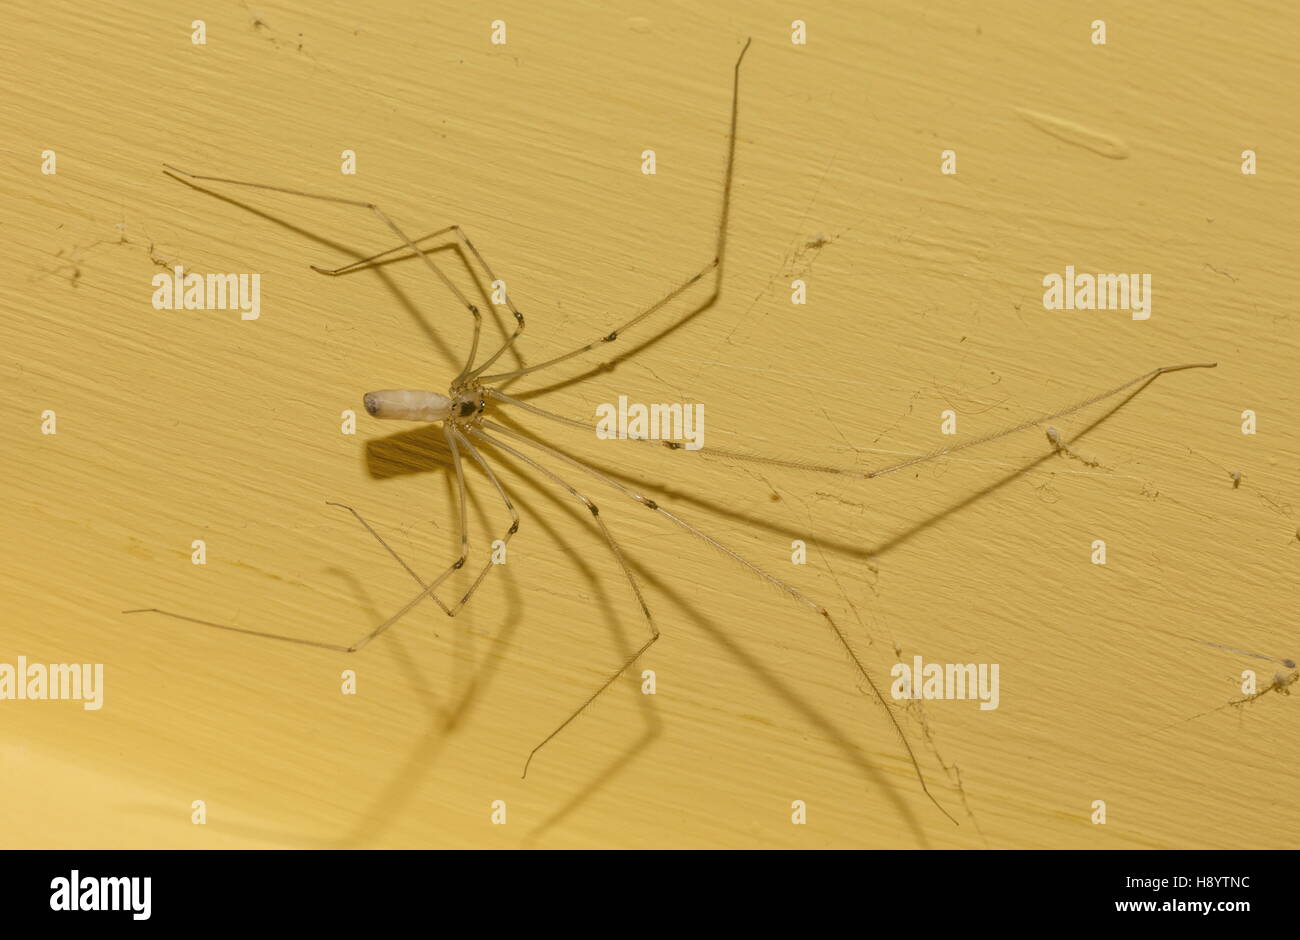 Female Daddy Long-legs Spider, Pholcus phalangioides, on bathroom wall. Stock Photo